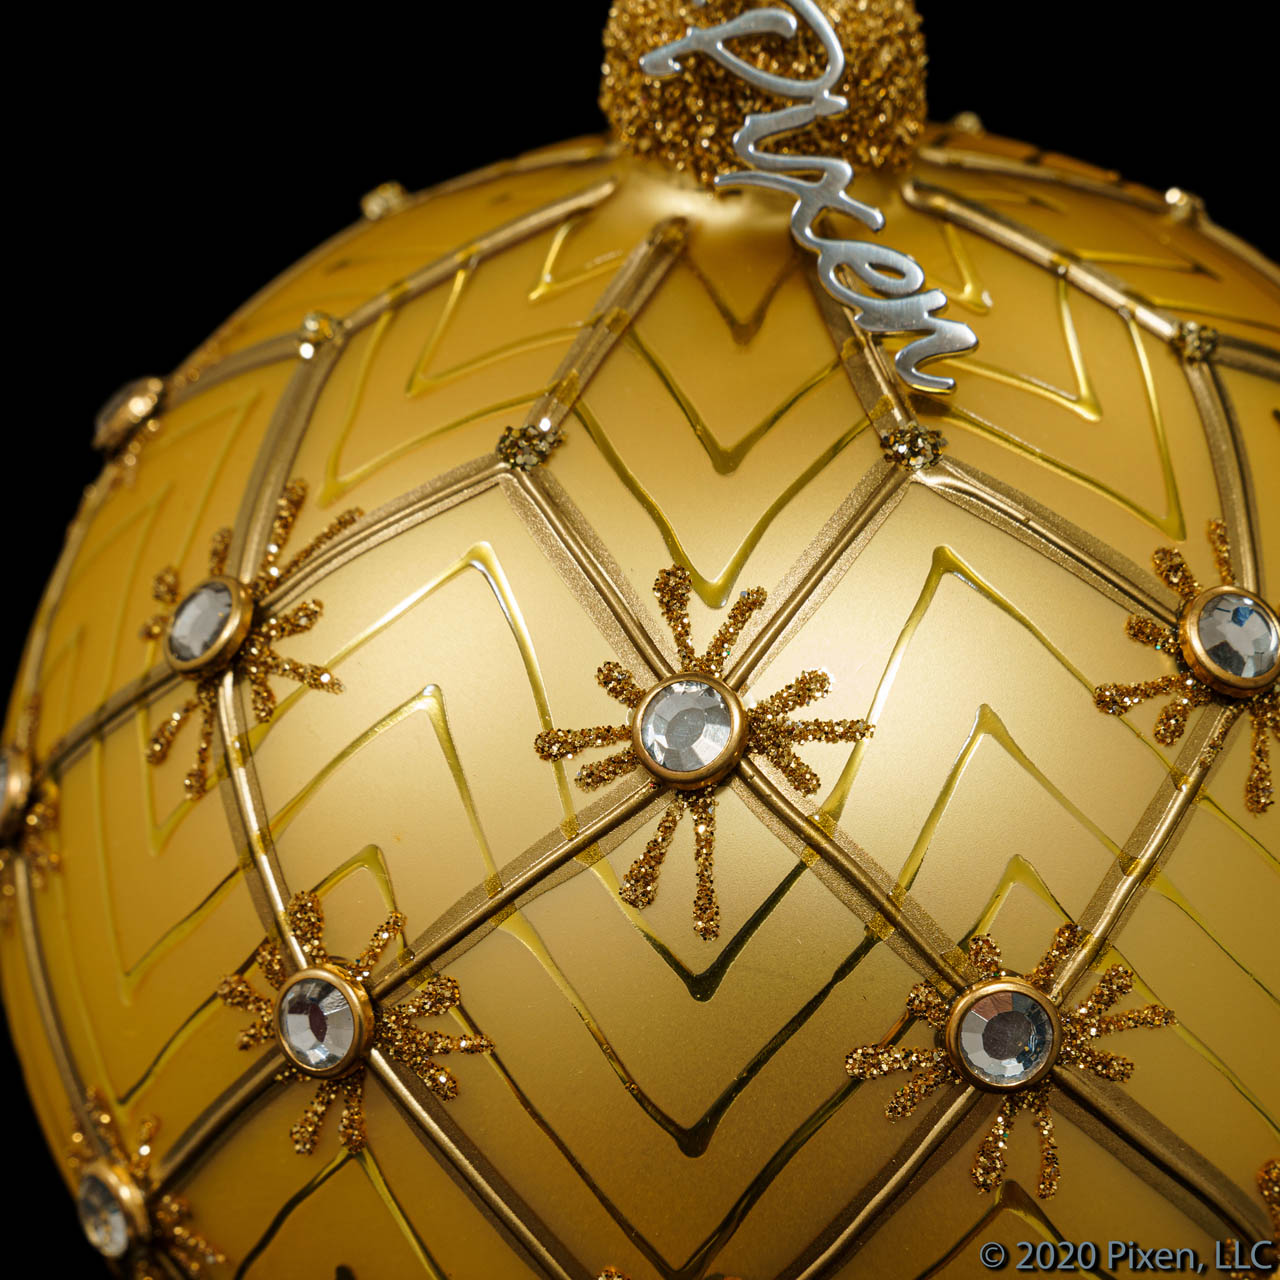 Sol is a golden glass Christmas ornament with rhinestones from the House of Pixen